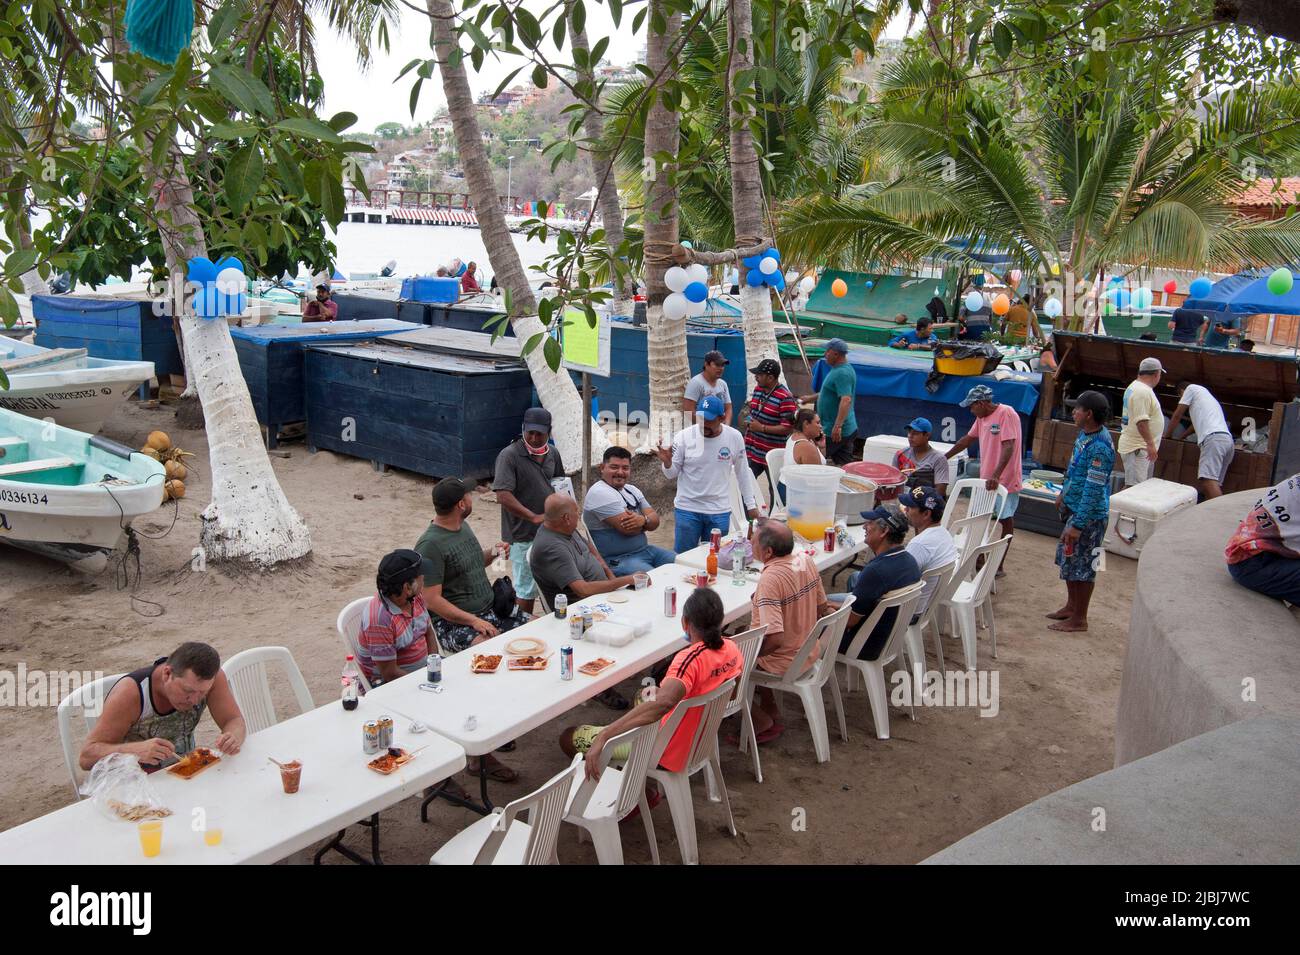 Fisherman enjoying a meal after fishing in Zihuatanejo, Mexico Stock Photo